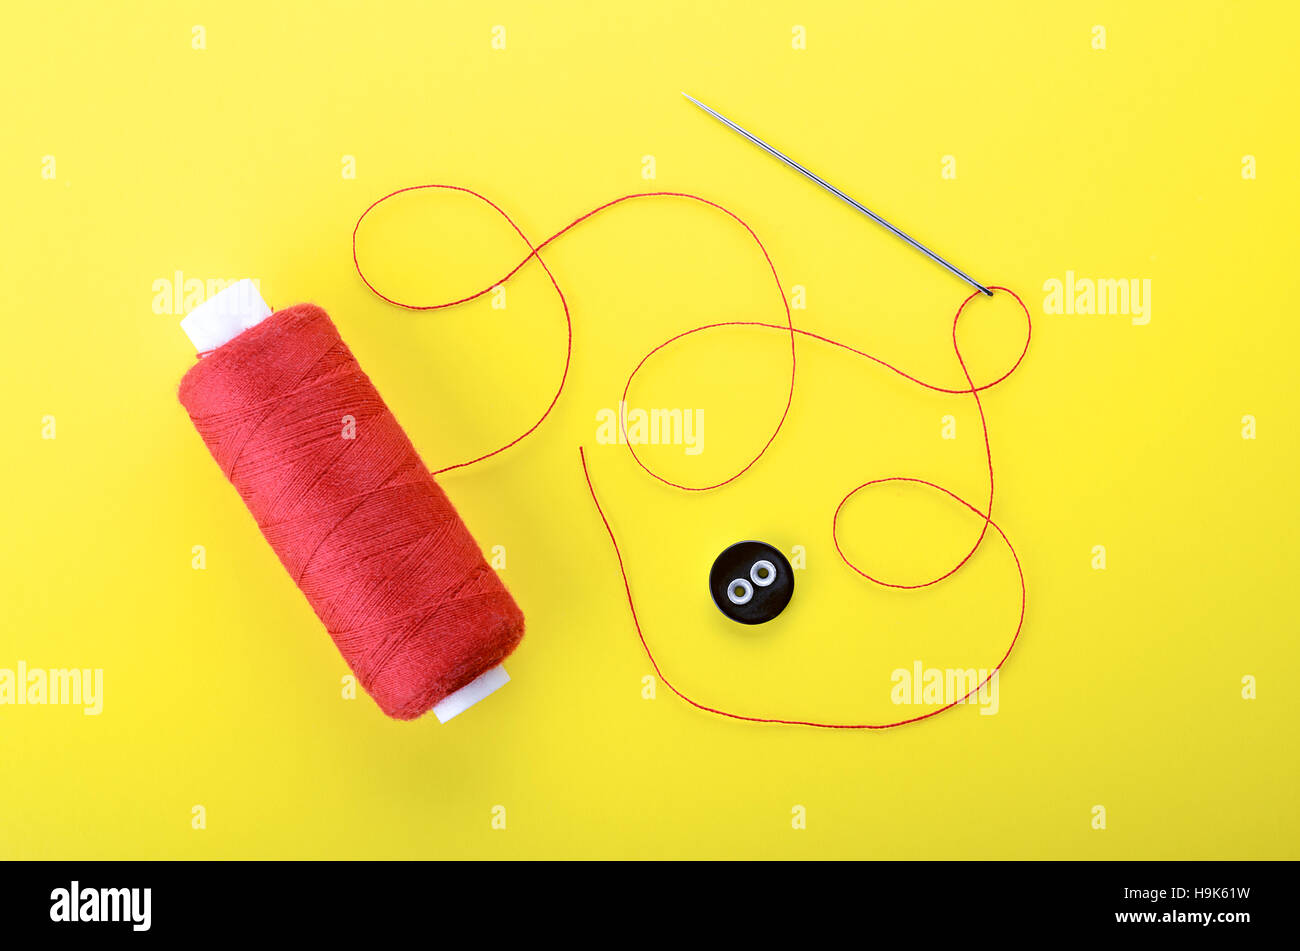 Spool of red thread, needle and clothing button on yellow background,  symbol of handmade and needlework. Stock Photo